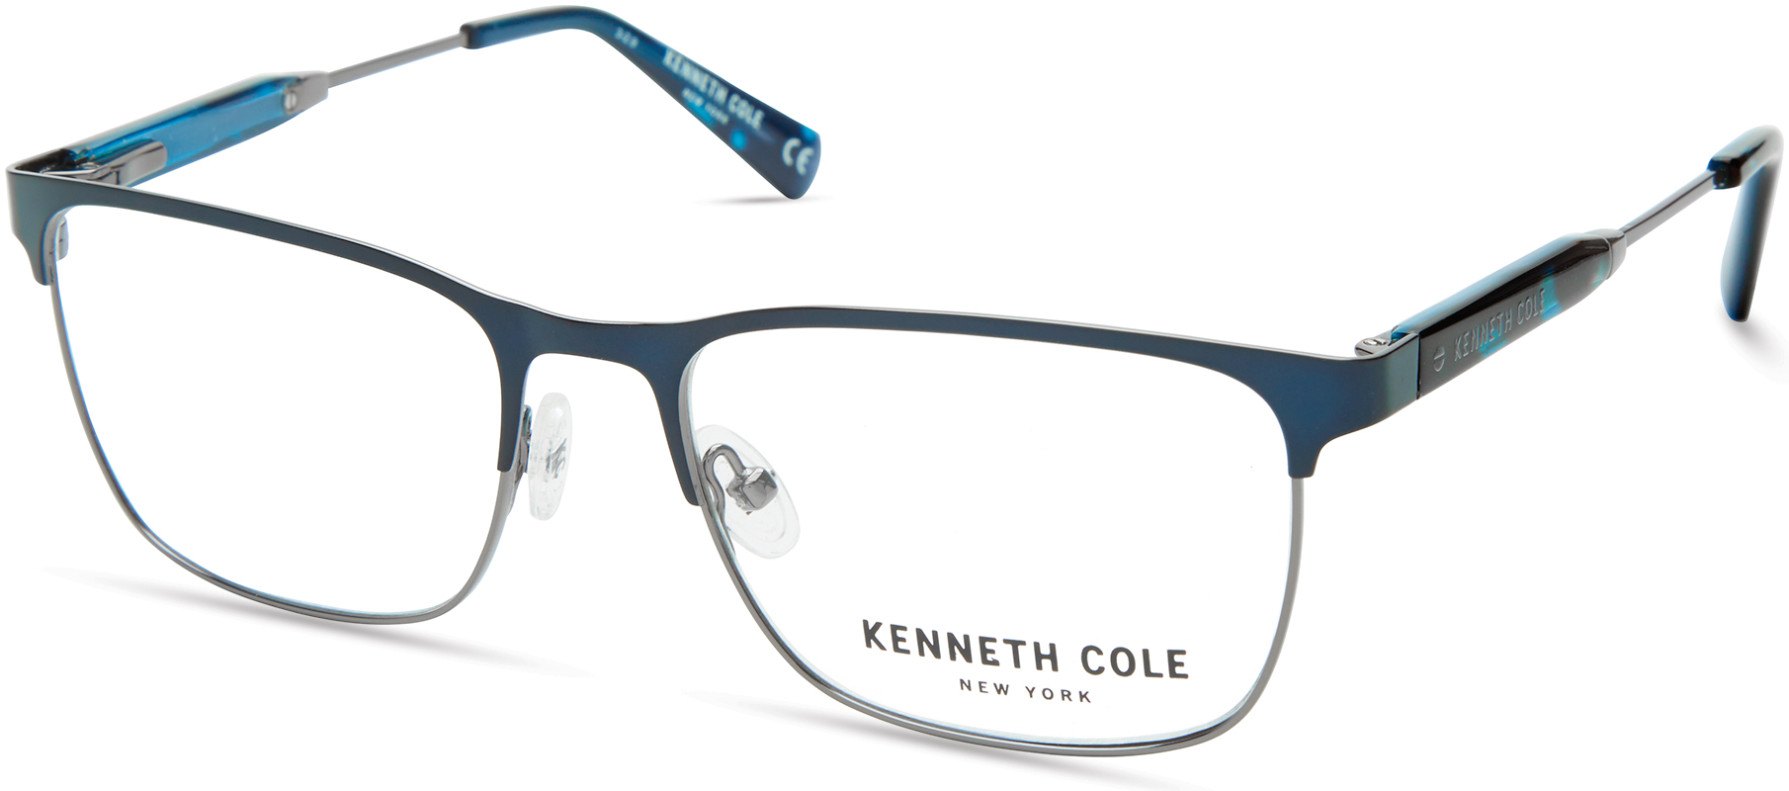 KENNETH COLE NY 0312 091